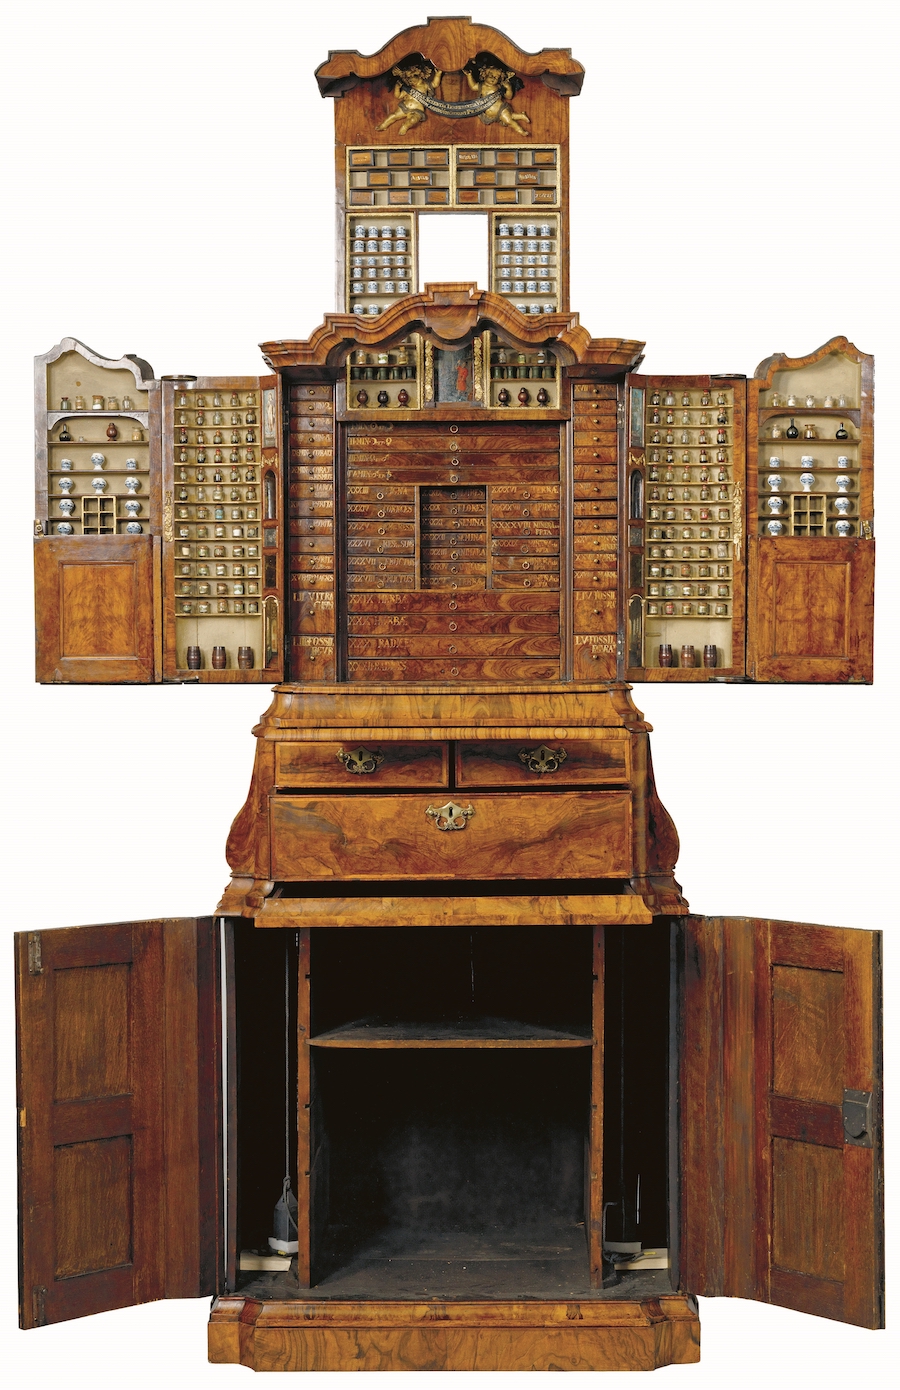 Elaborate Cabinets That May Contain Portals To Narnia